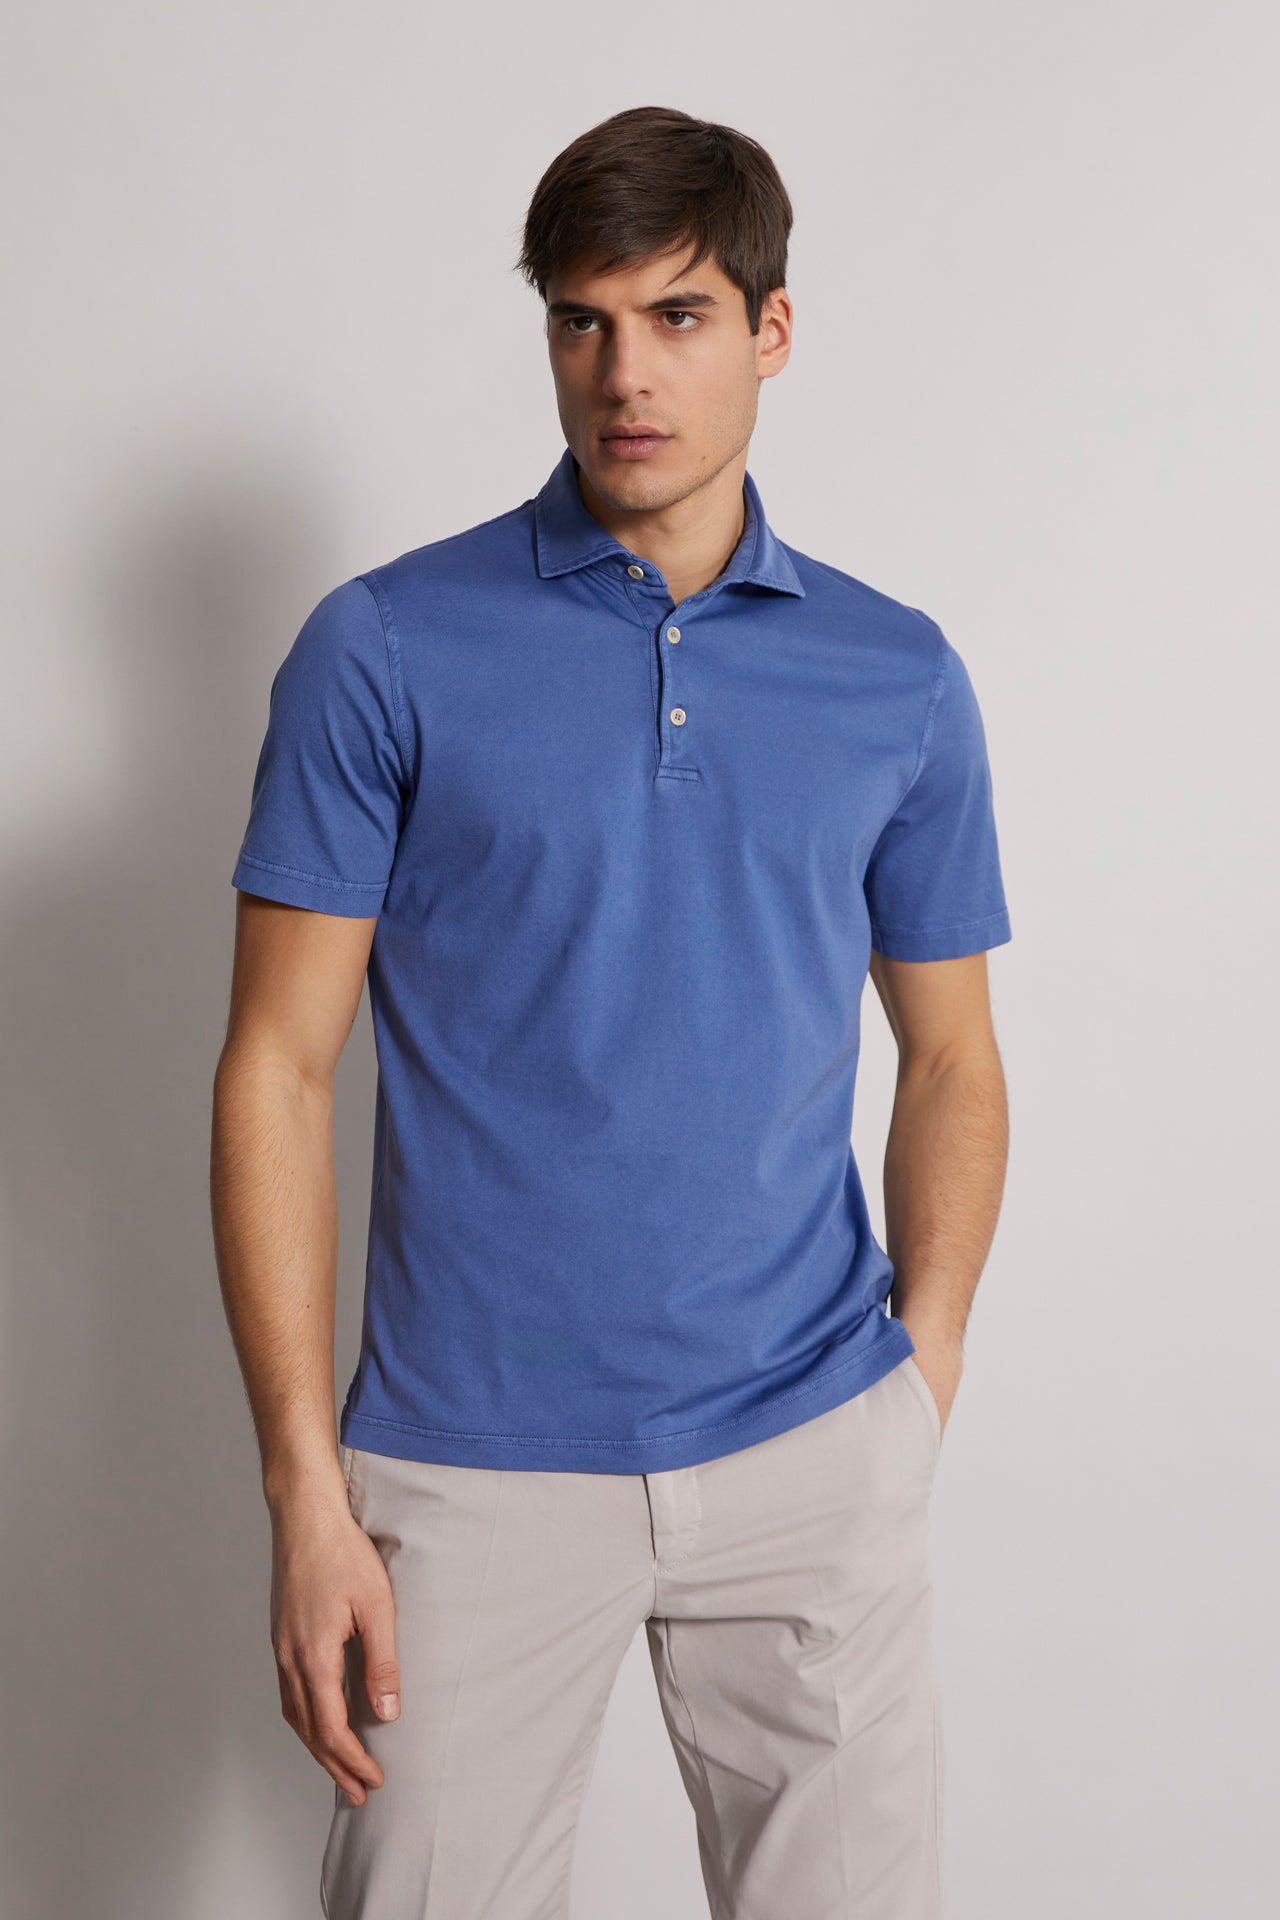 short sleeves polo t-shirt blue - front view